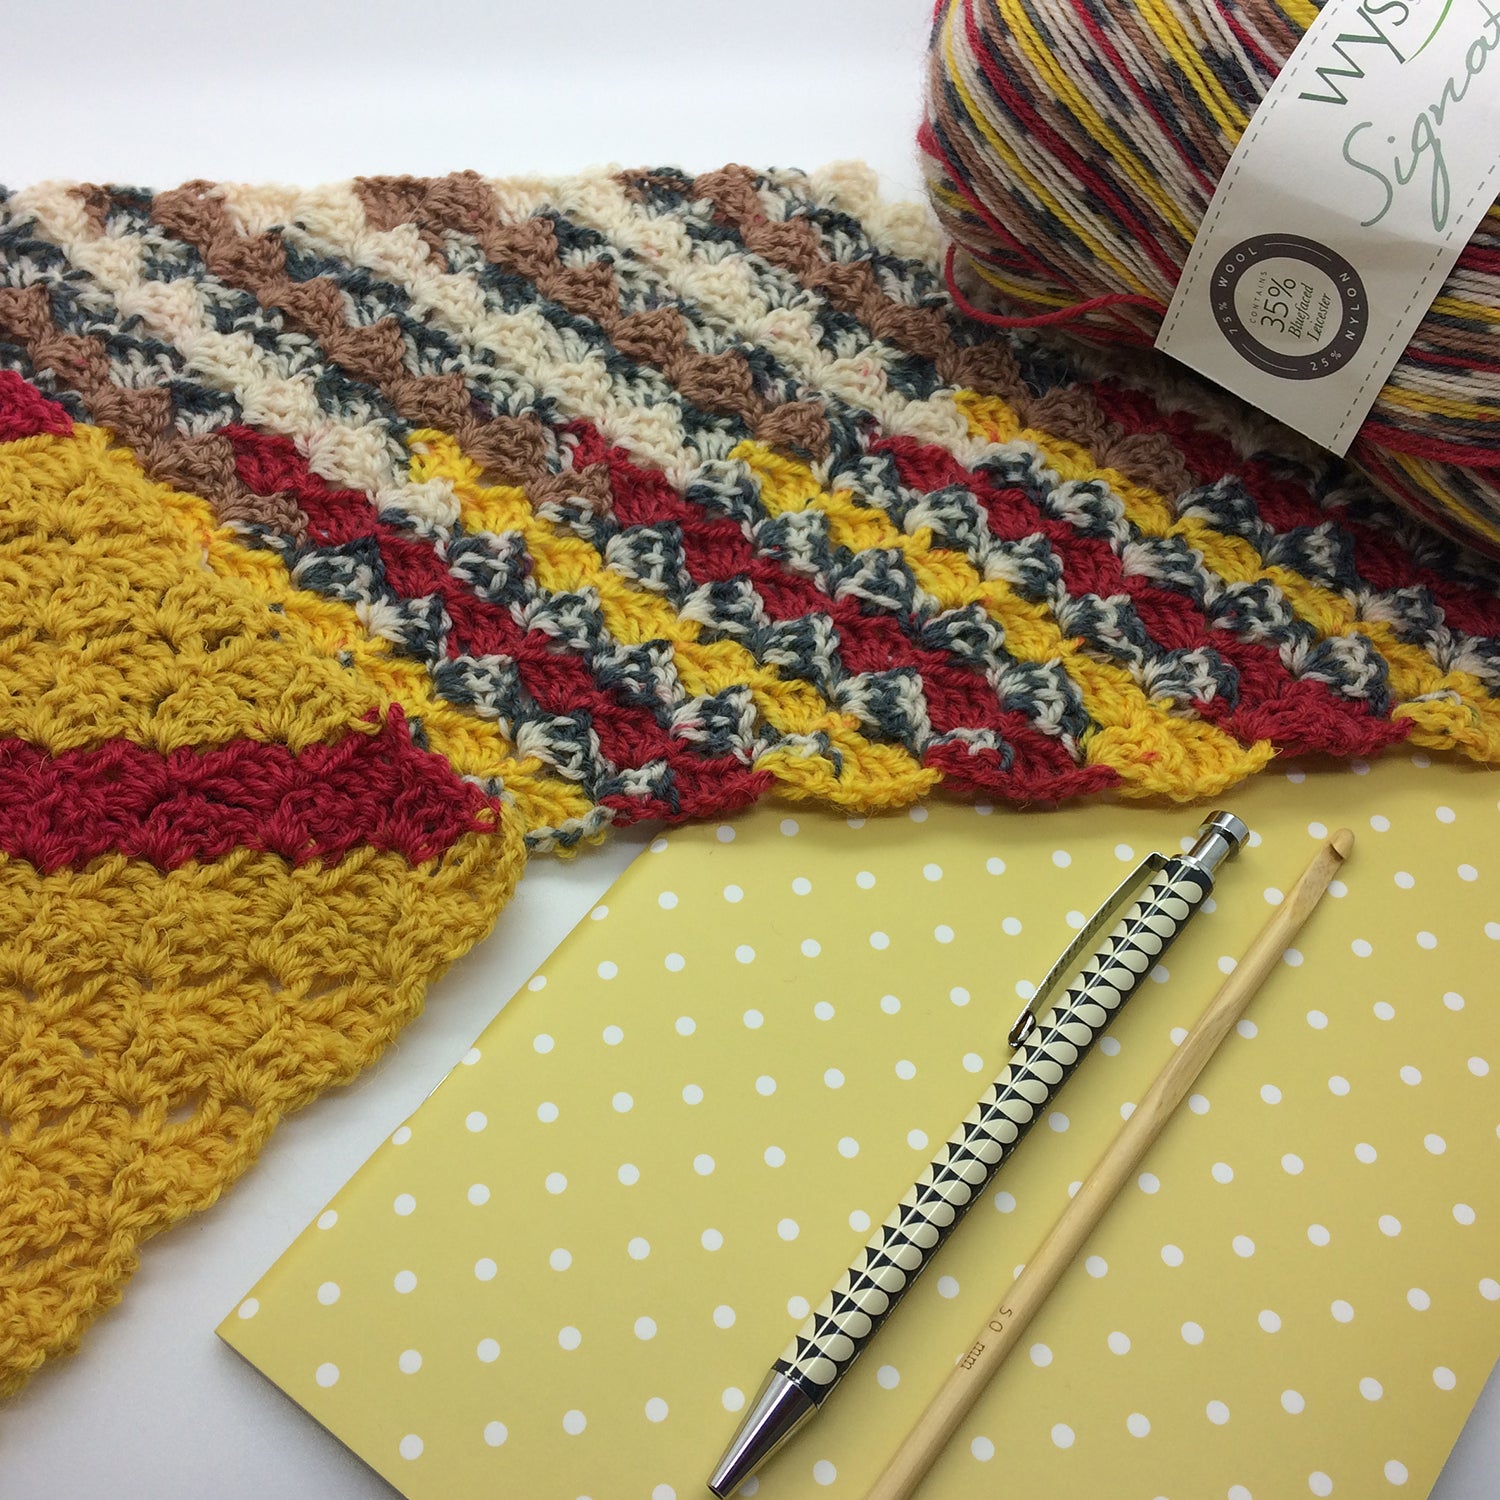 Mindful Knitting and Crochet